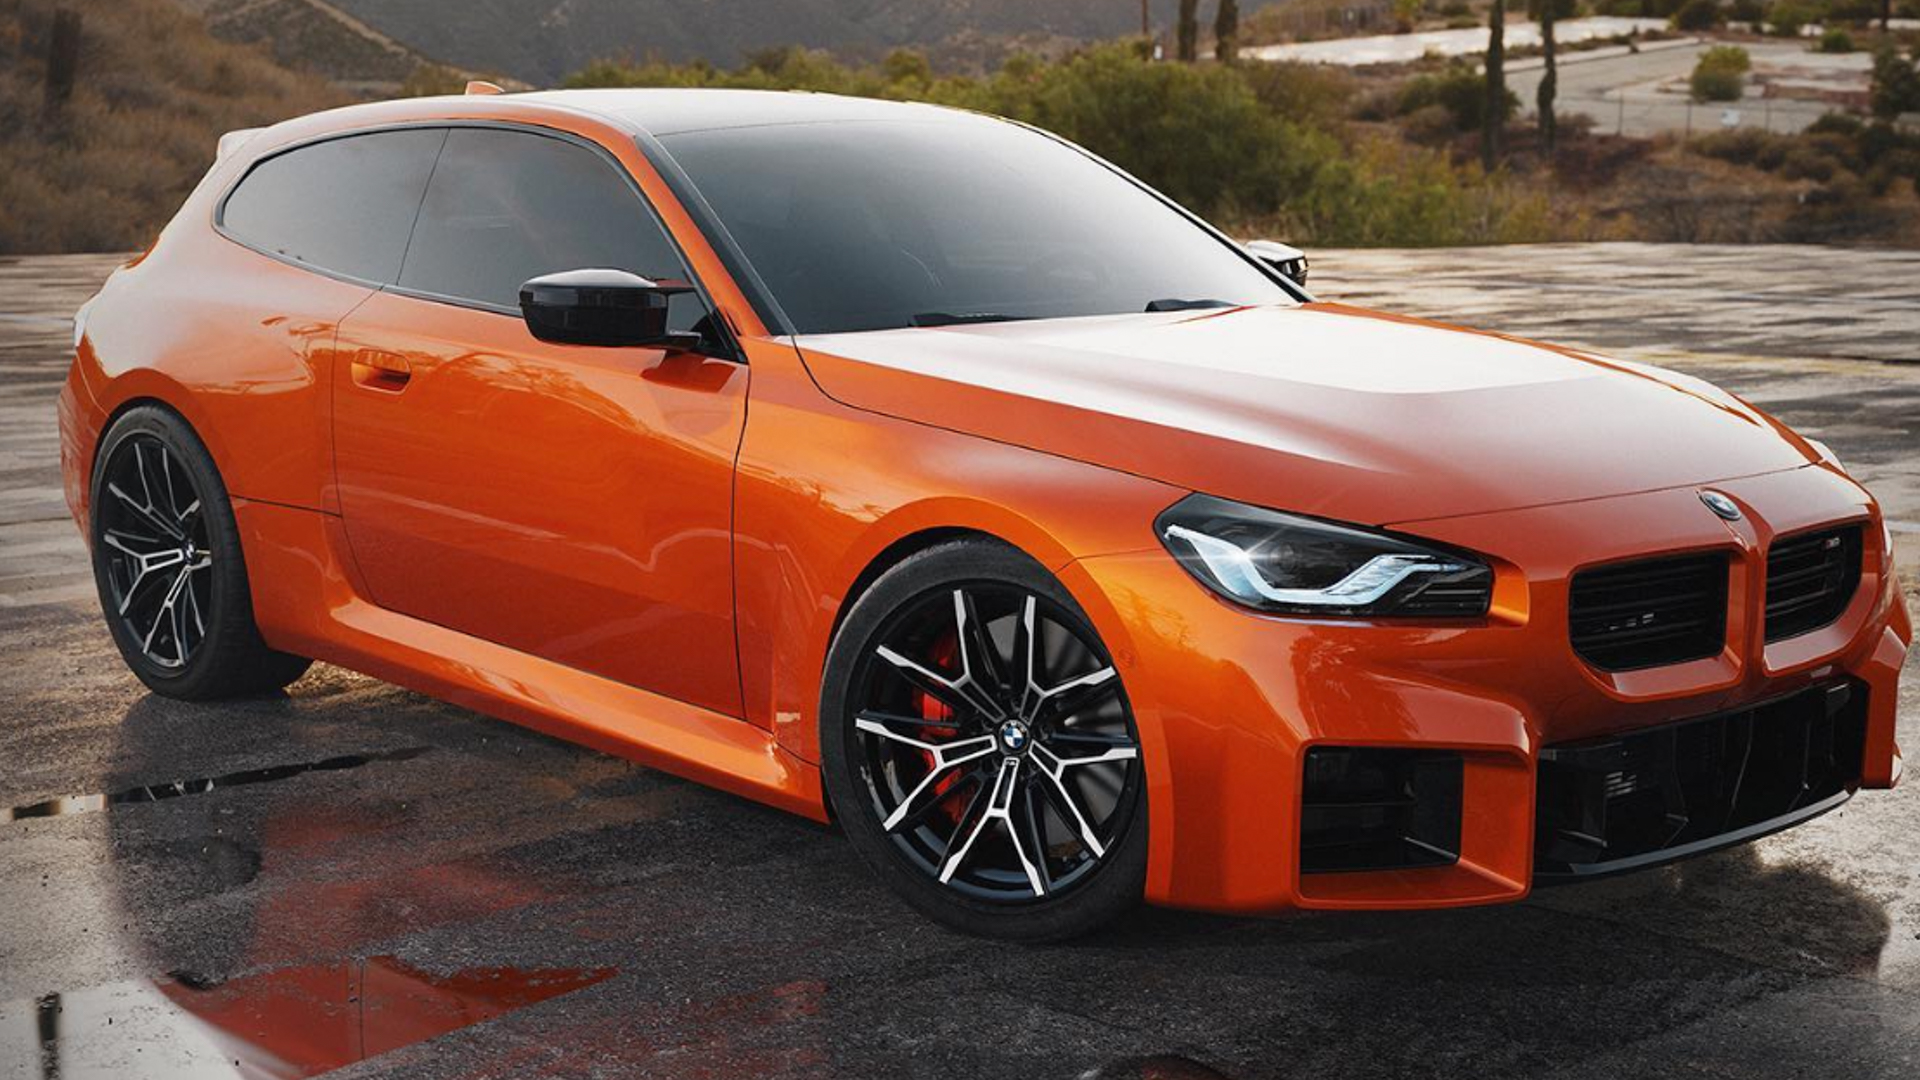 G87 BMW M2 Looks Awesome Rendered as a Shooting Break